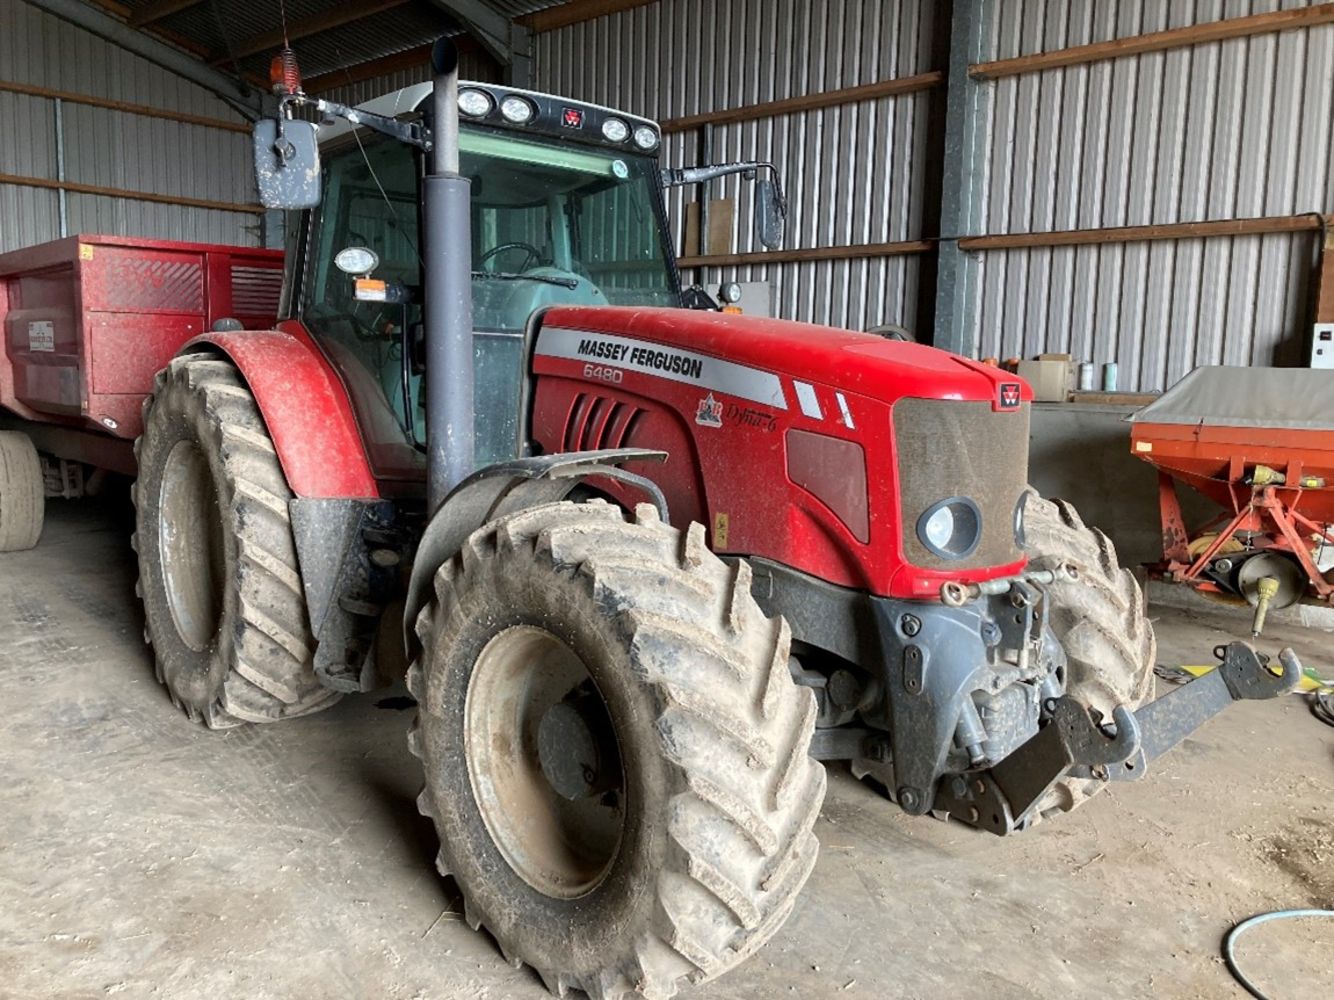 SALE OF TRACTORS, COMBINE, FORKLIFT, TRAILERS, CULTIVATION EQUIPMENT AND OTHER FARM MACHINERY